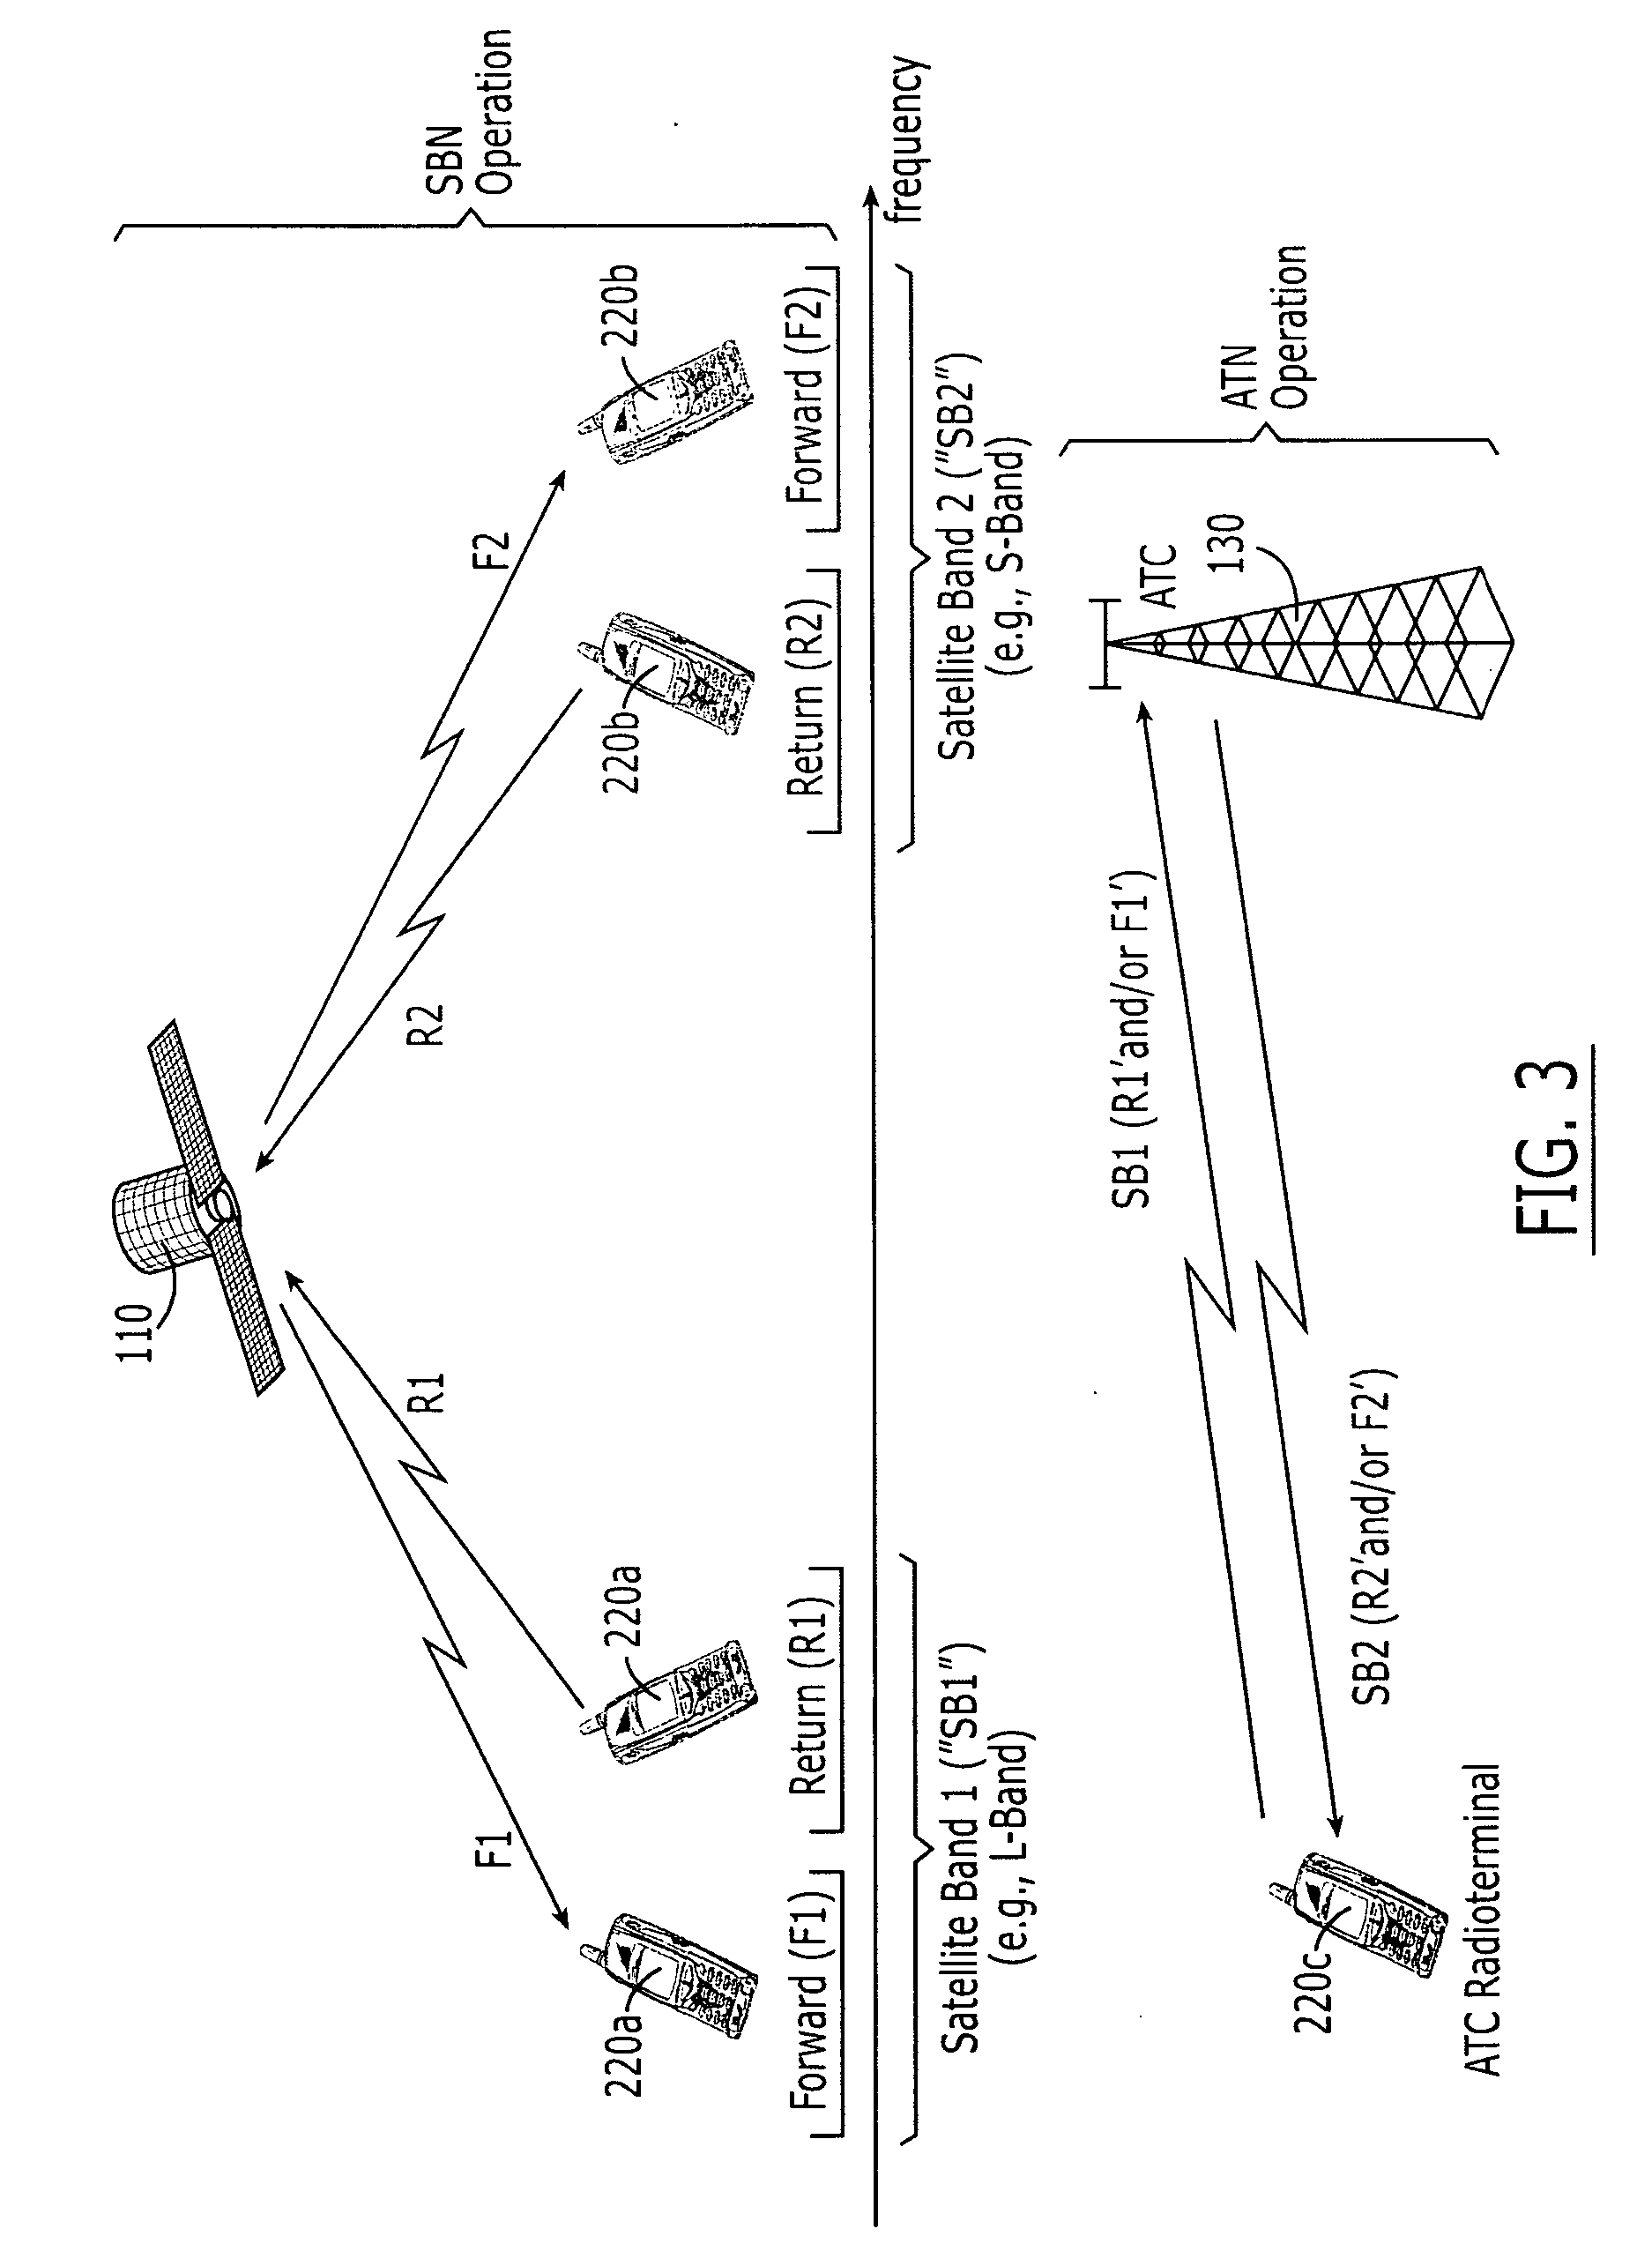 Systems and methods with different utilization of satellite frequency bands by a space-based network and an ancillary terrestrial network